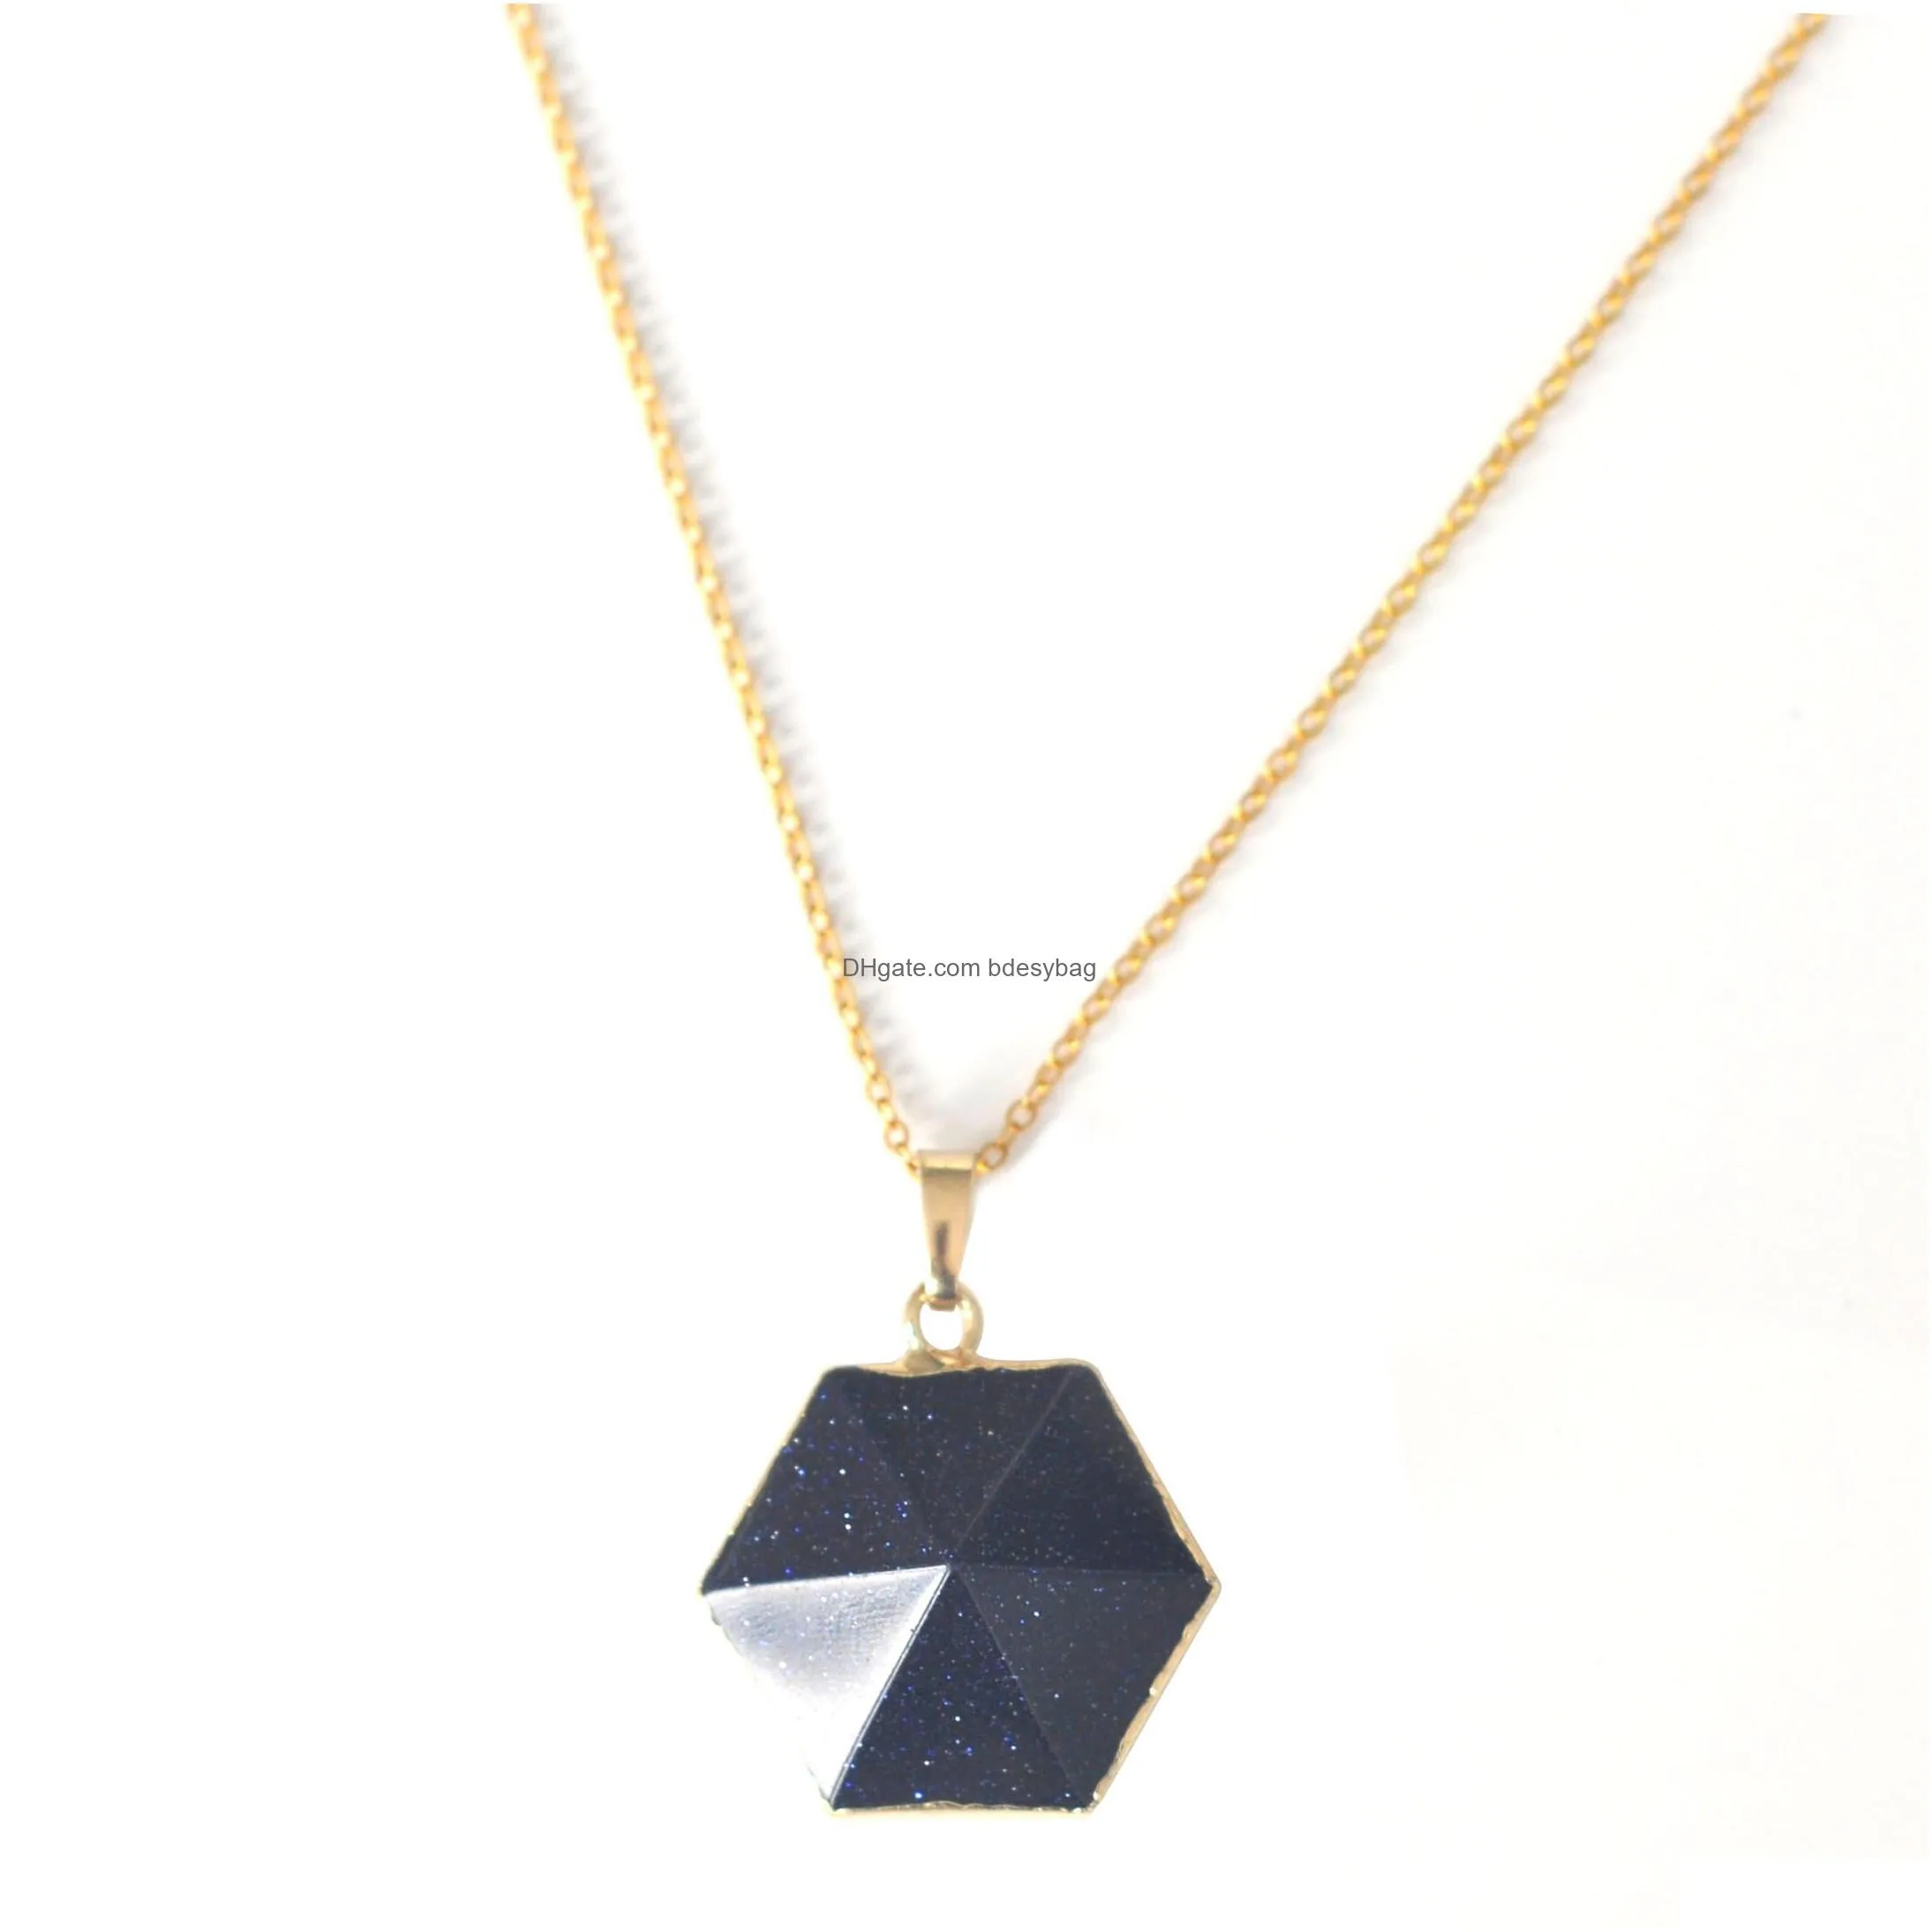 hexagonal pyramid crystal necklace pendant necklaces charm luminous alloy stone in the dark gift for girls and woman